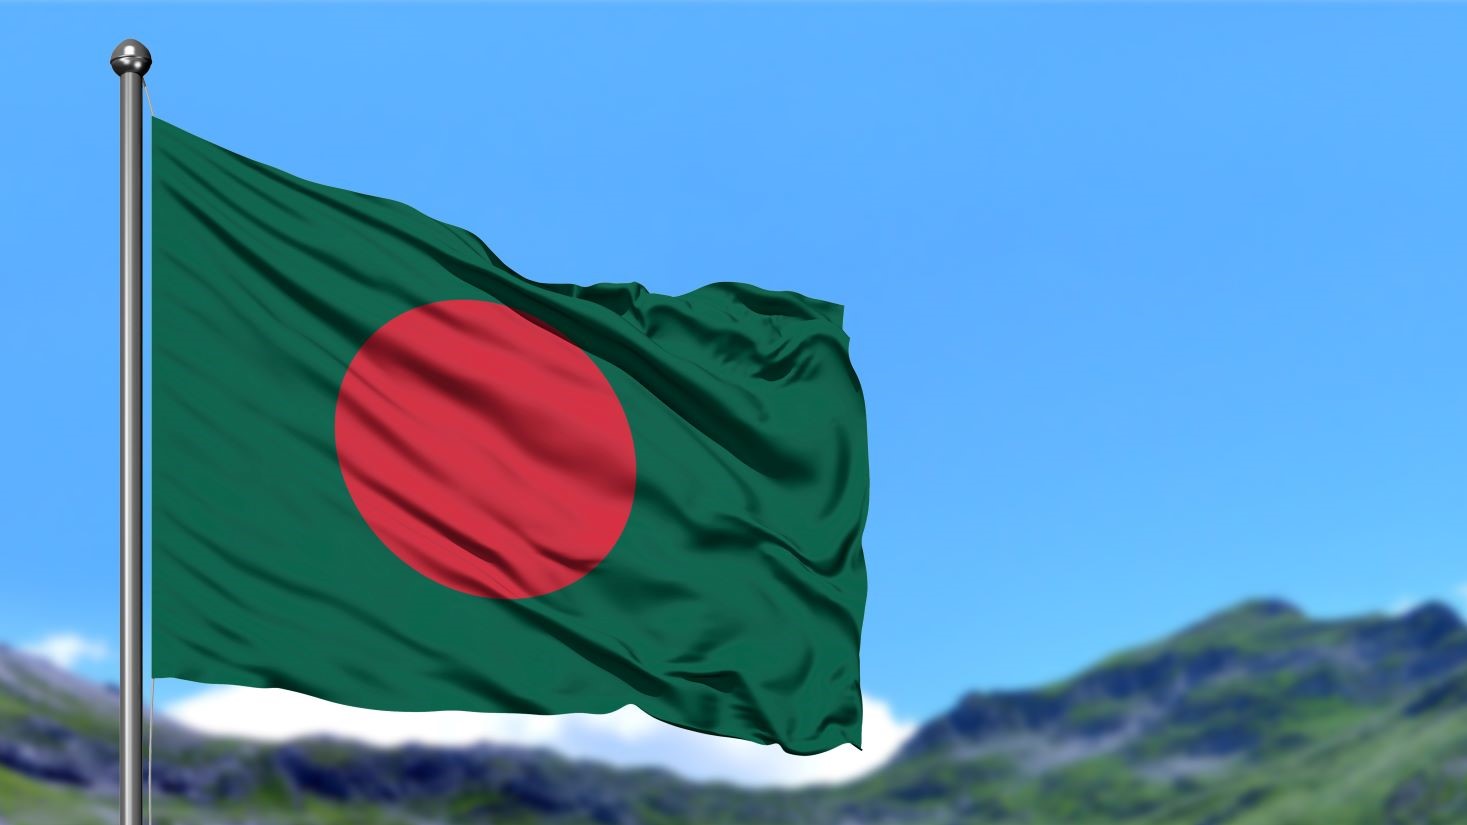 Bangladesh's flag waving and mountains in the background